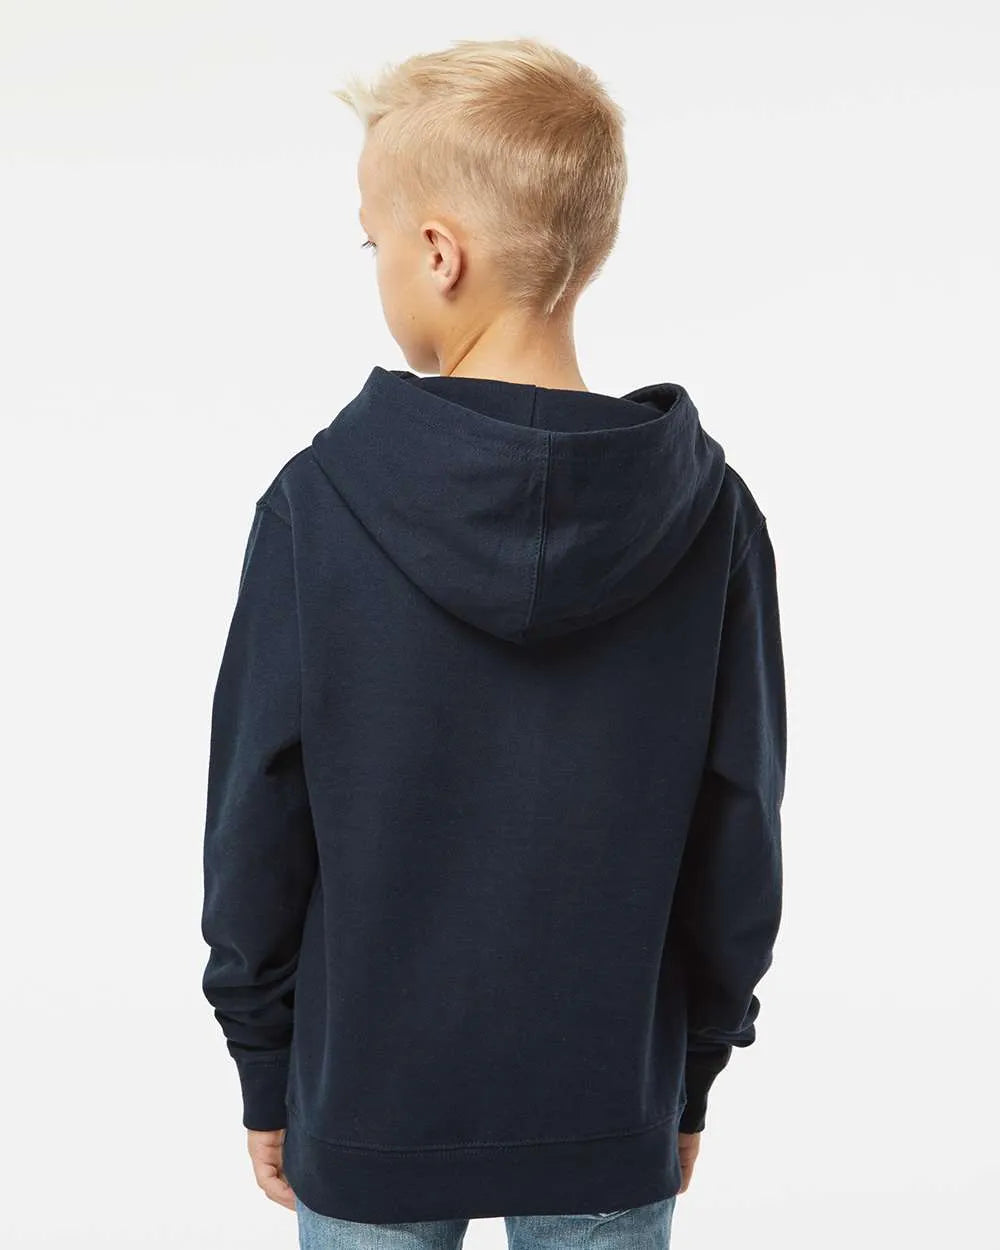 Youth Midweight Hooded Sweatshirt - SS4001Y - Print Me Shirts